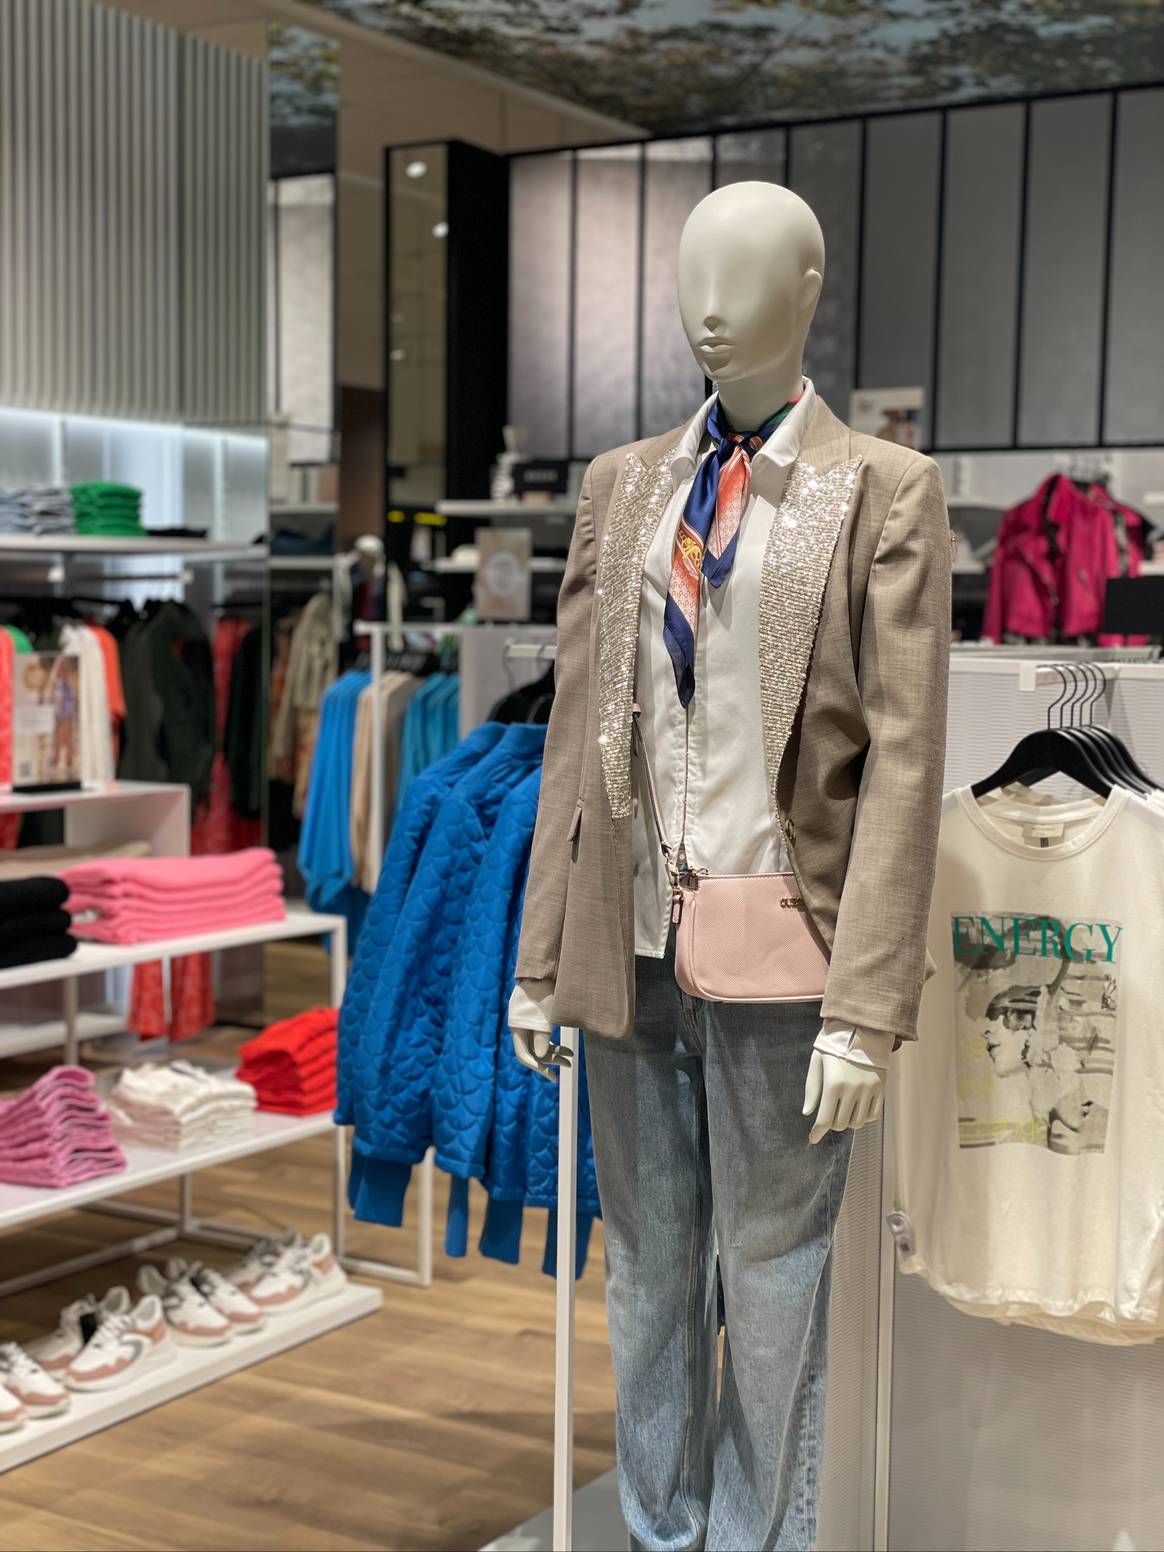 Beeld: The Fashion Store